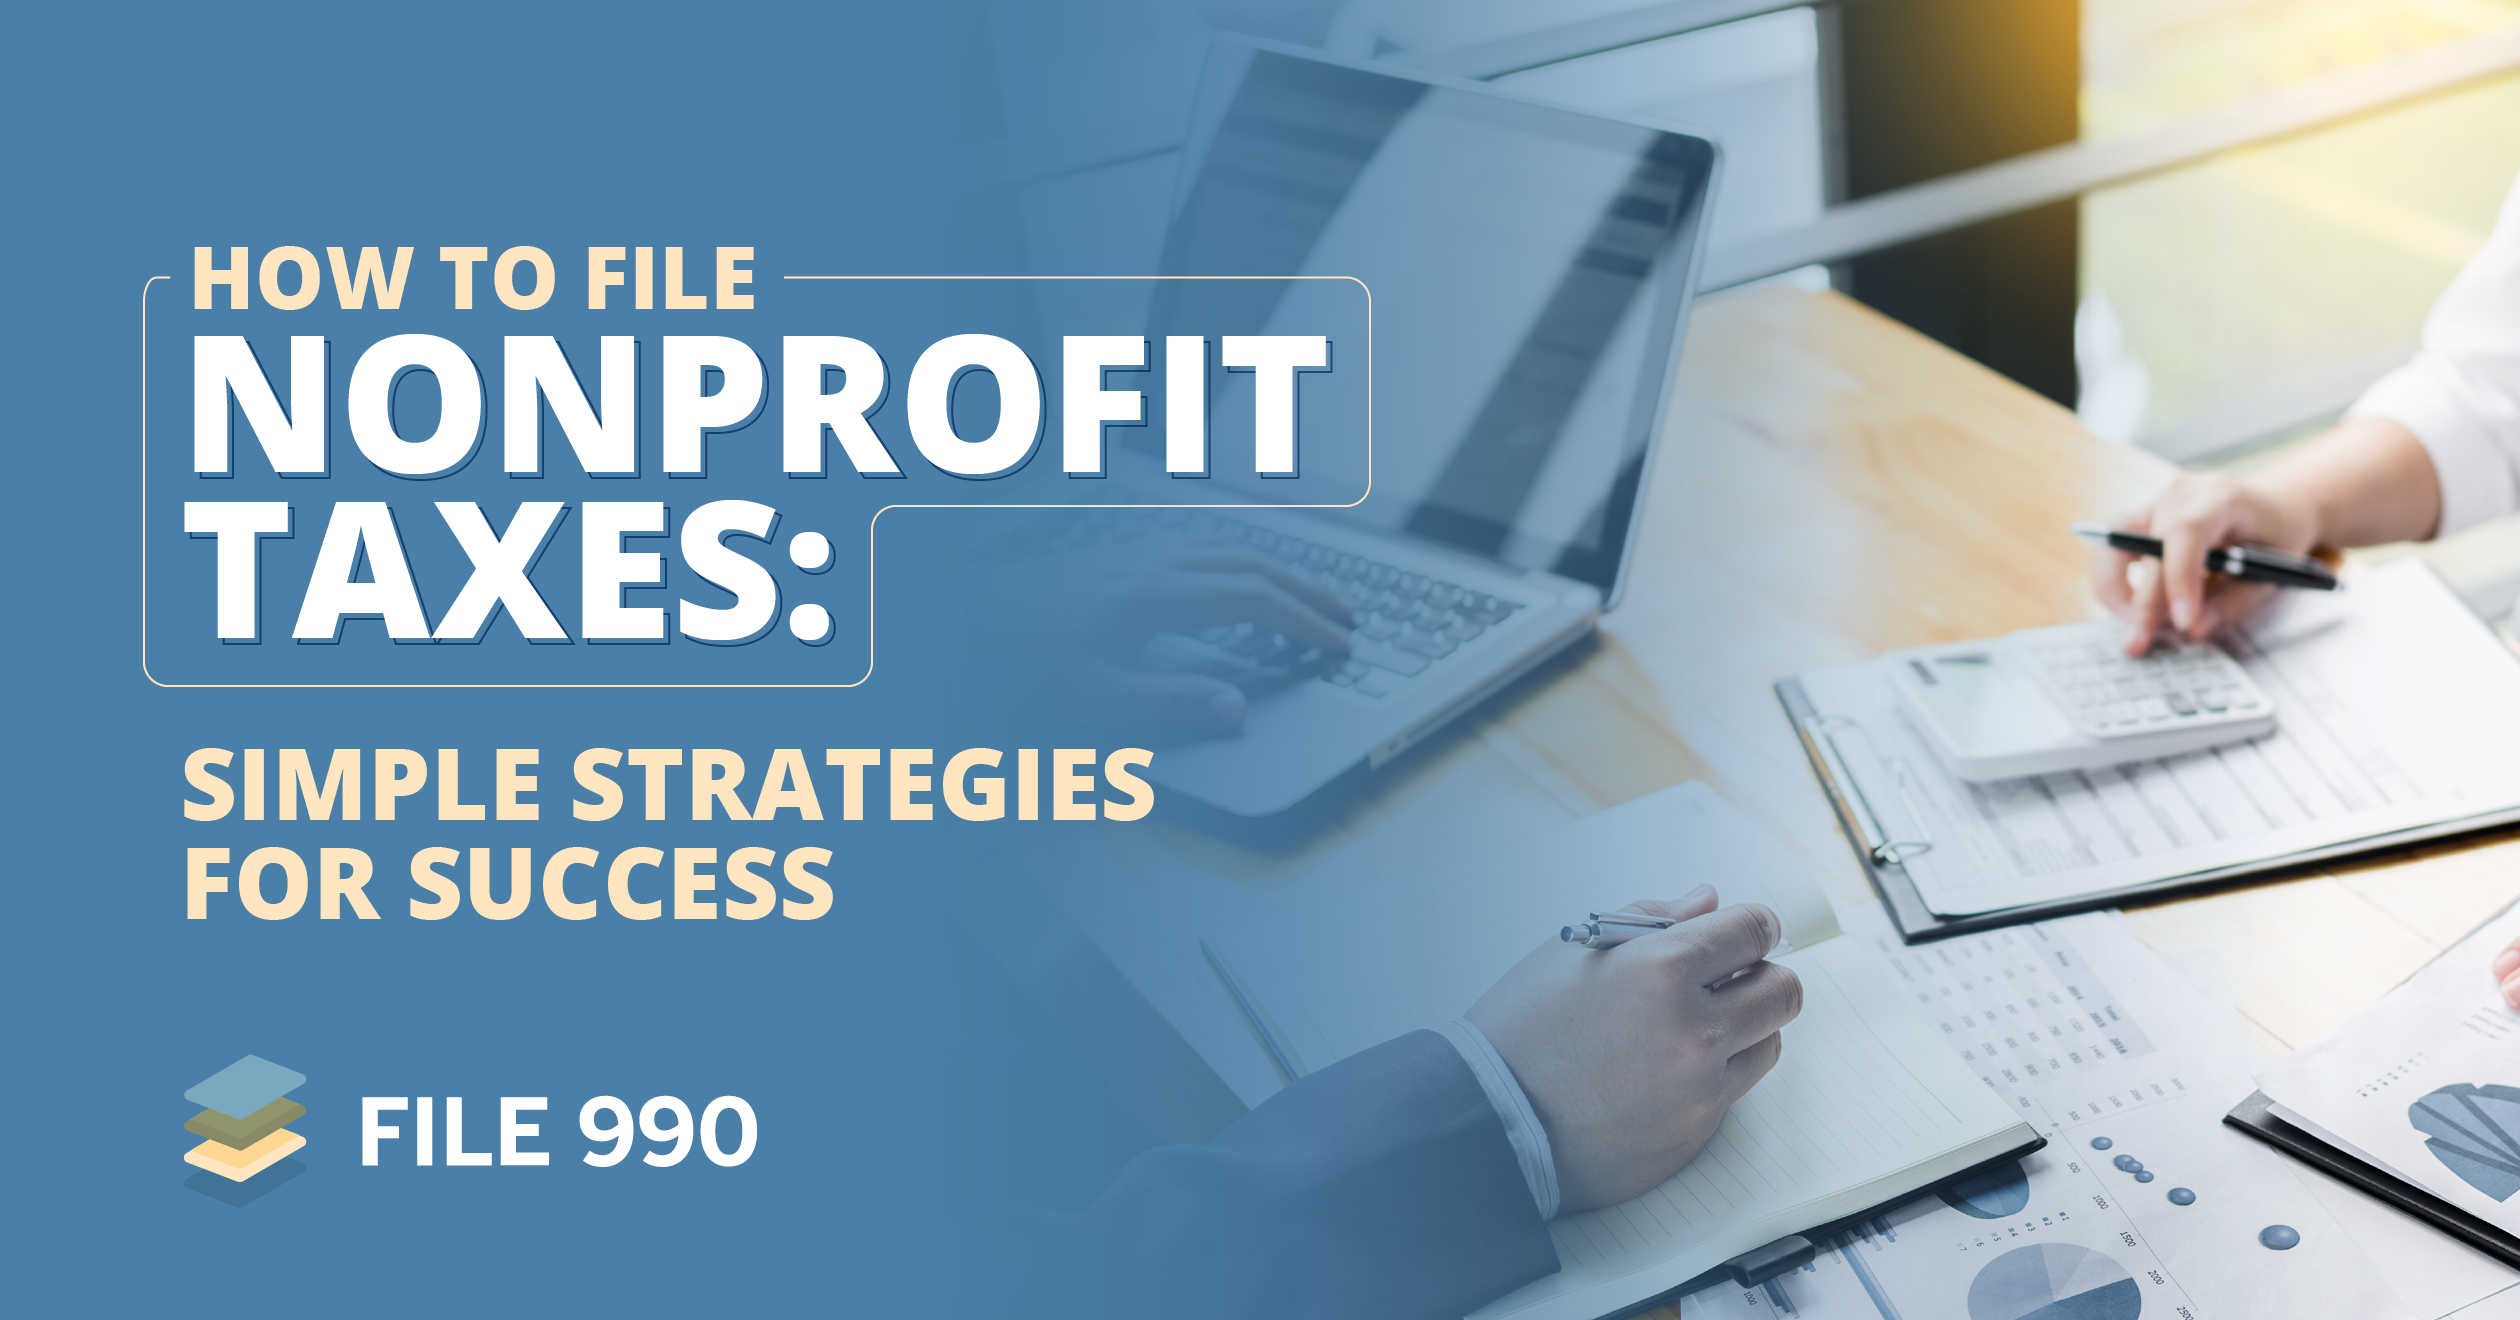 How to File Nonprofit Taxes: Simple Strategies for Success